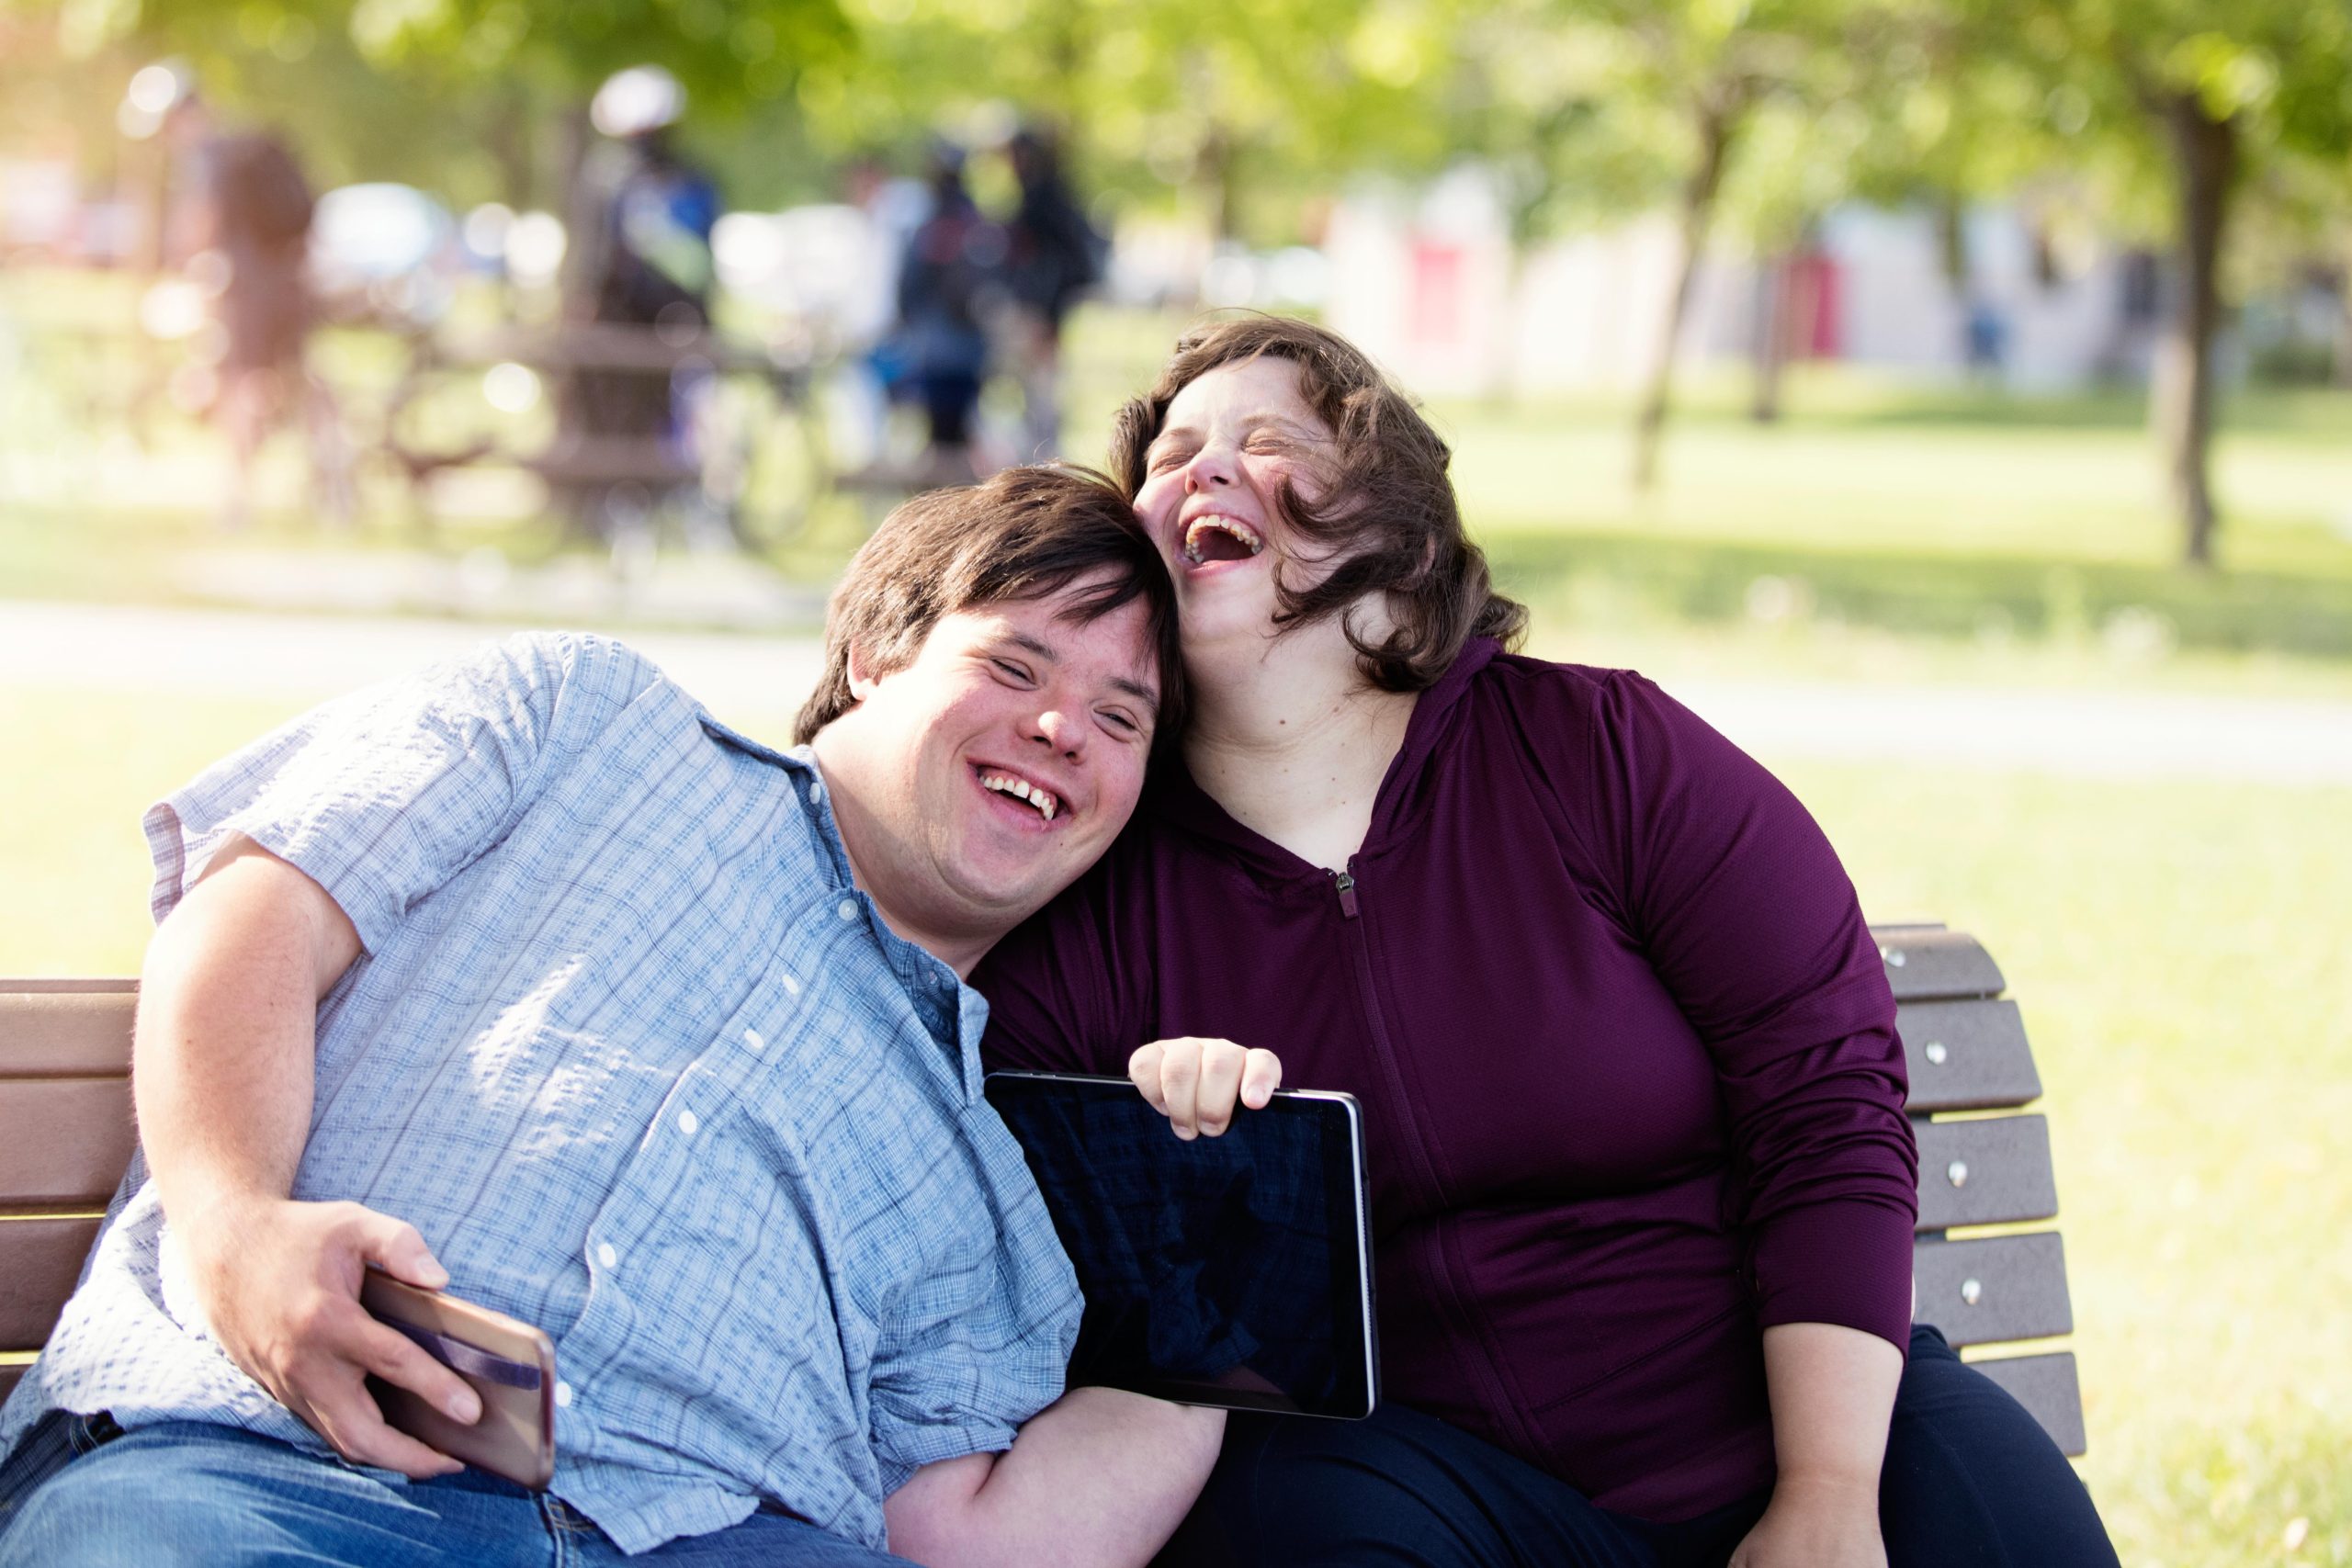 image: a man and a woman with light skin and dark hair, both with obvious disabilities in casual attire laughing in a park setting sitting in a bench